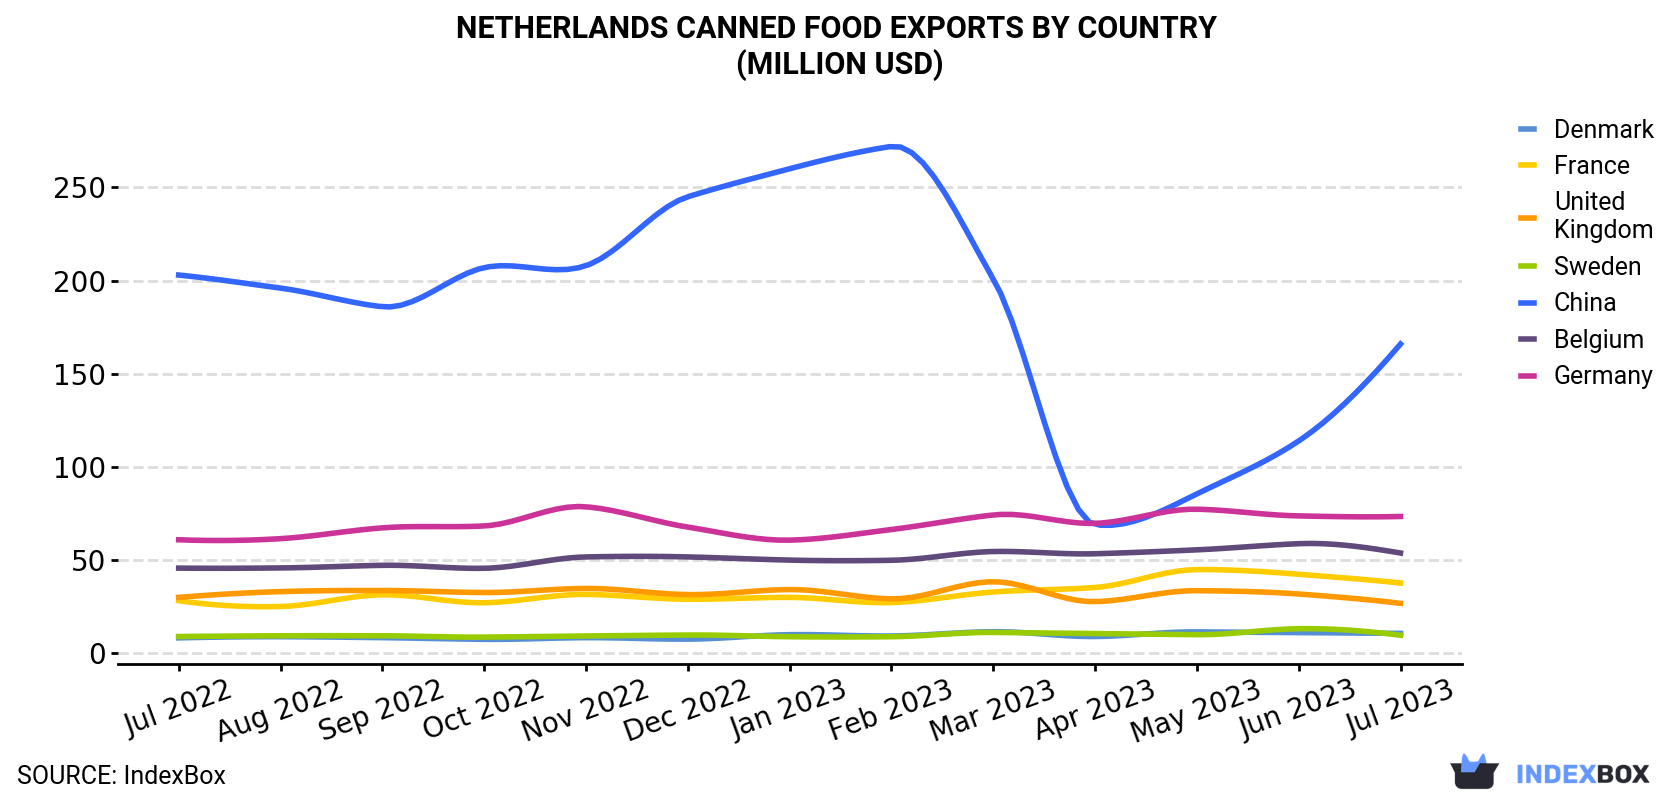 Netherlands Canned Food Exports By Country (Million USD)